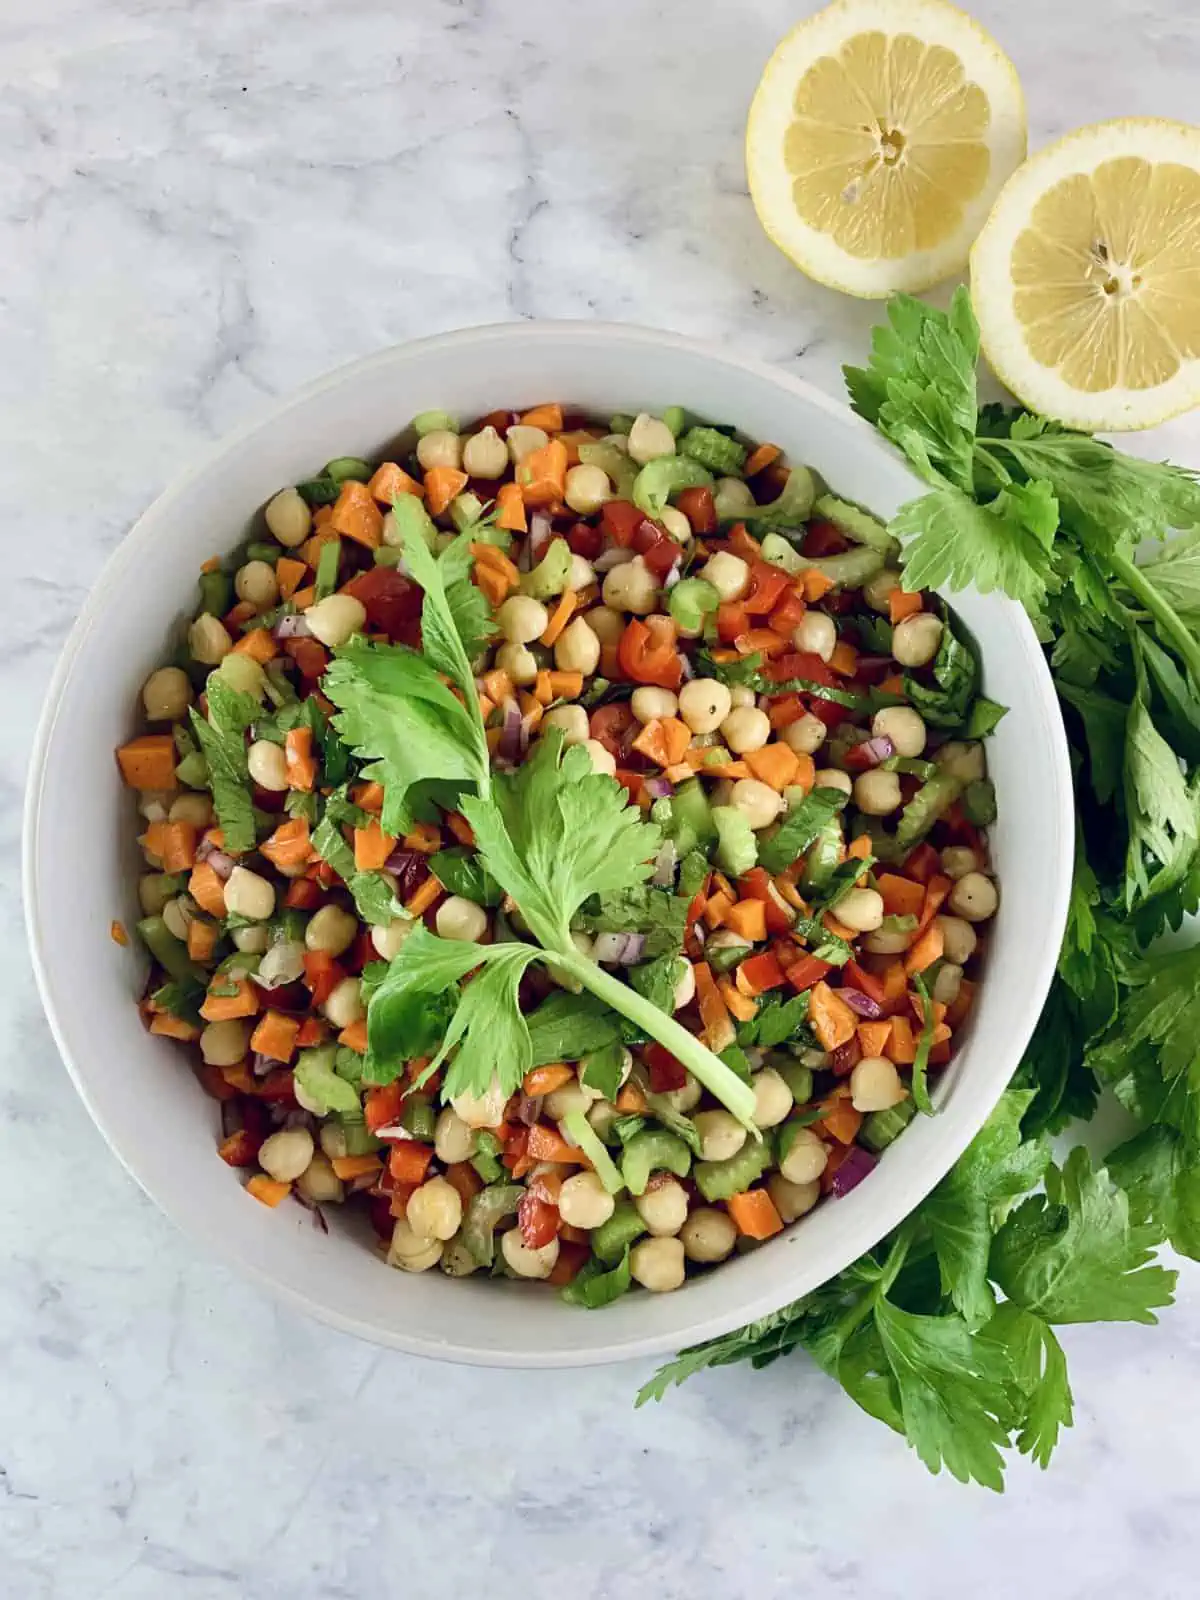 Vibrant garbanzo bean salad in a white bowl with celery leaves and lemon halves on the side.